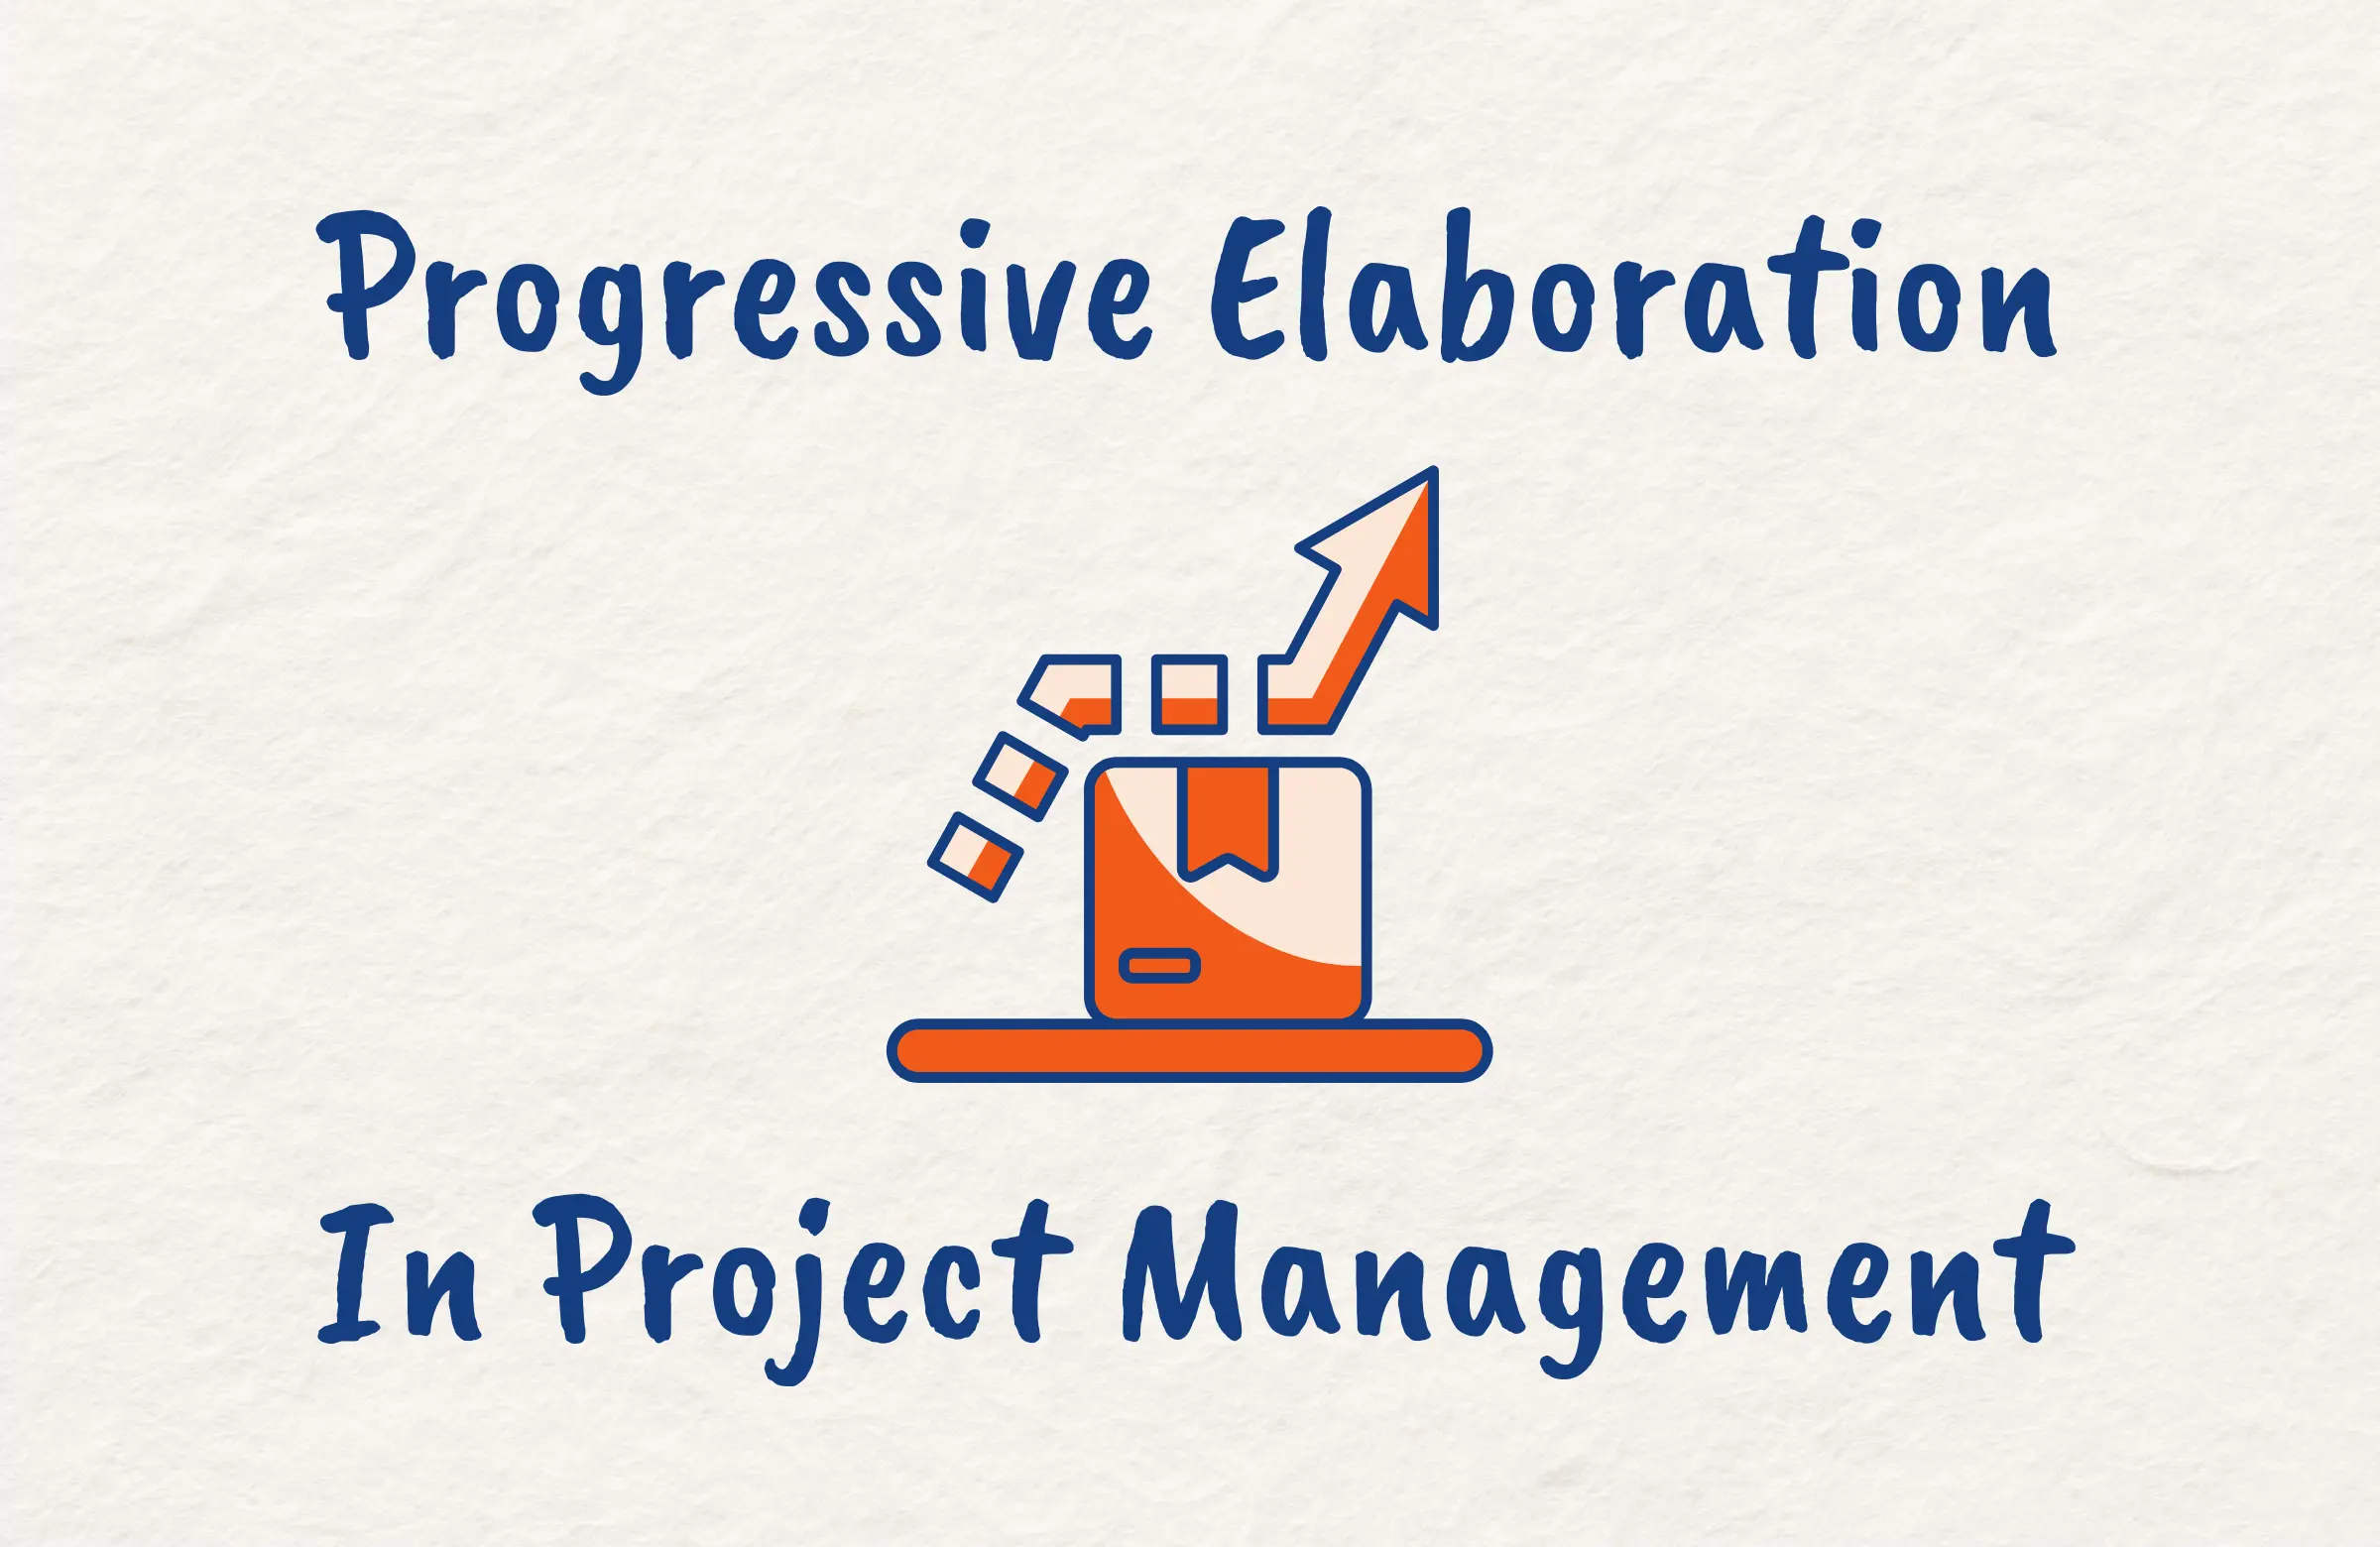 What is Progressive Elaboration in Project Management